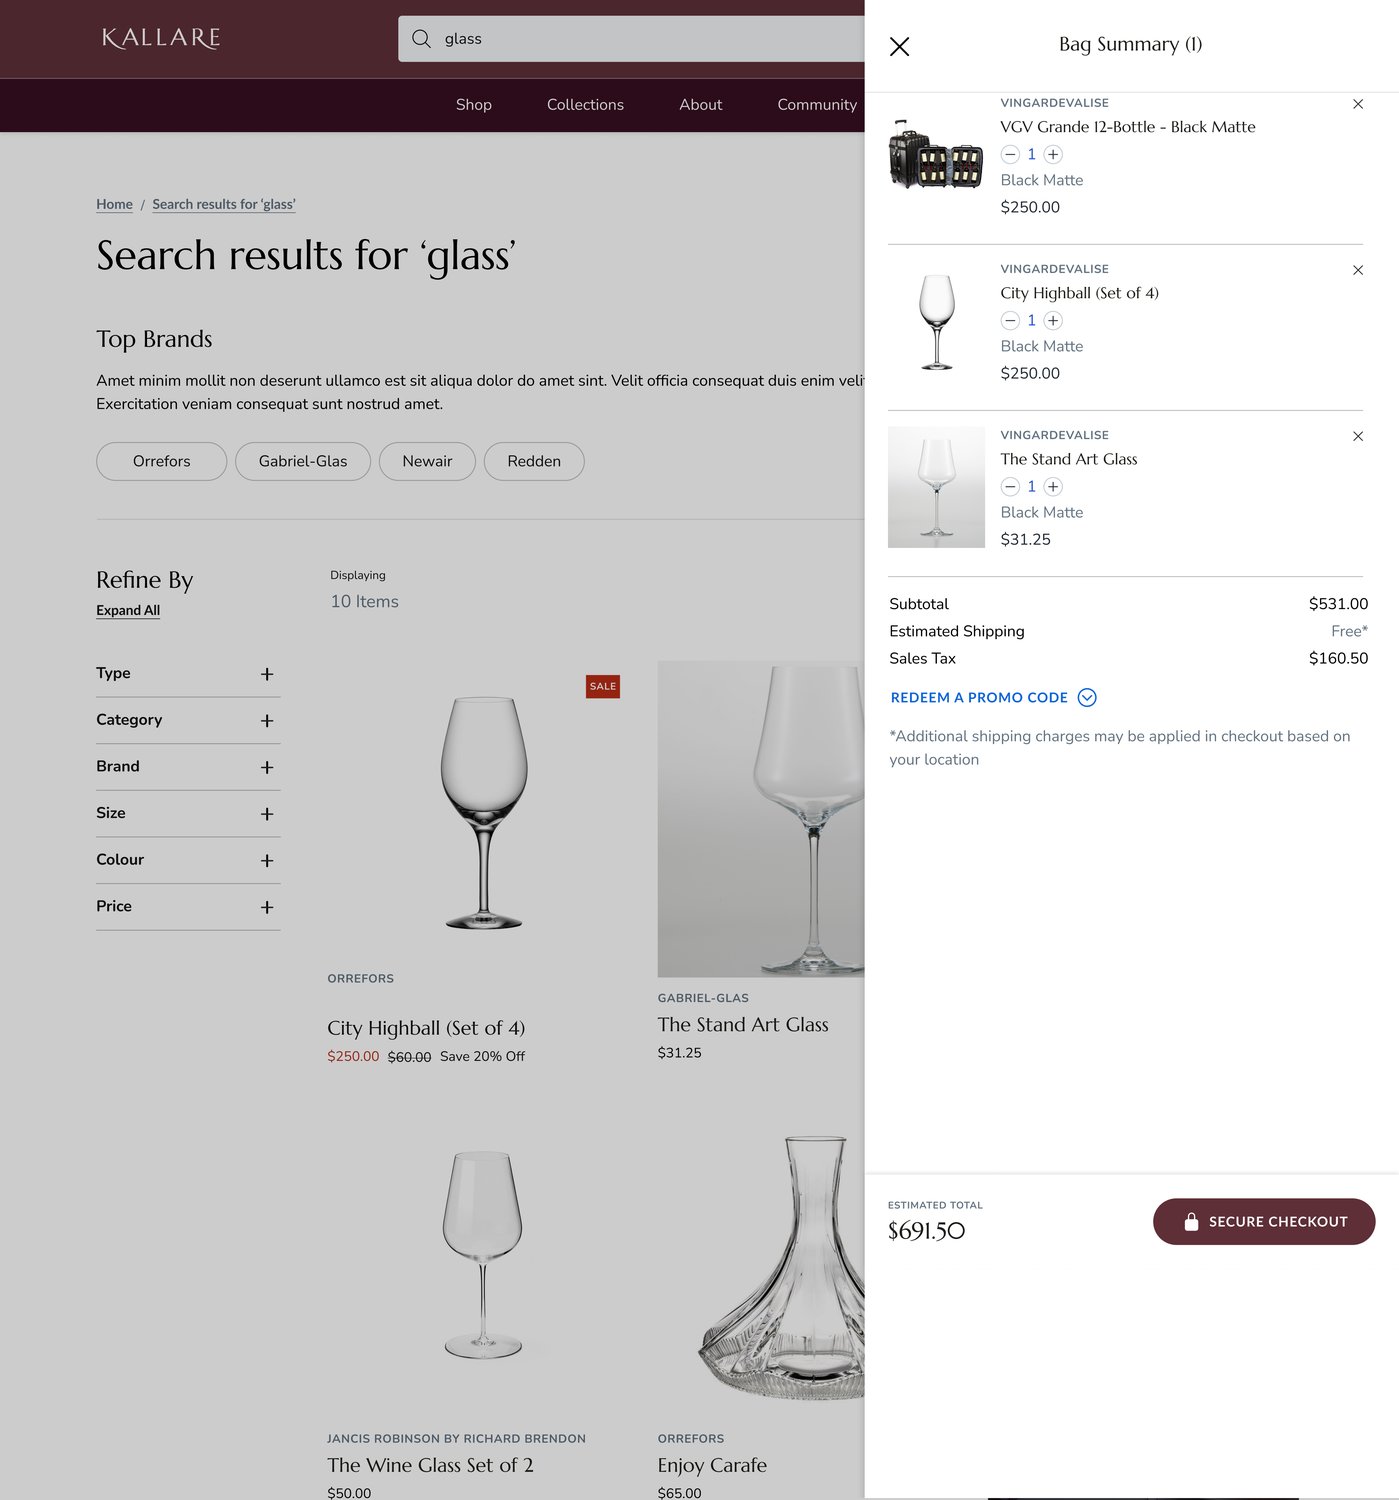 Image of a desktop website diplaying the results of a search for glass. 3 wine glasses are displayed with corresponding product group, product name, price, and discounts where applicable. A filter to refine results appears to the left of the screen. Overlayed above the website is a cart summary displaying 3 products, their summarized price, applied tax, and free shipping.